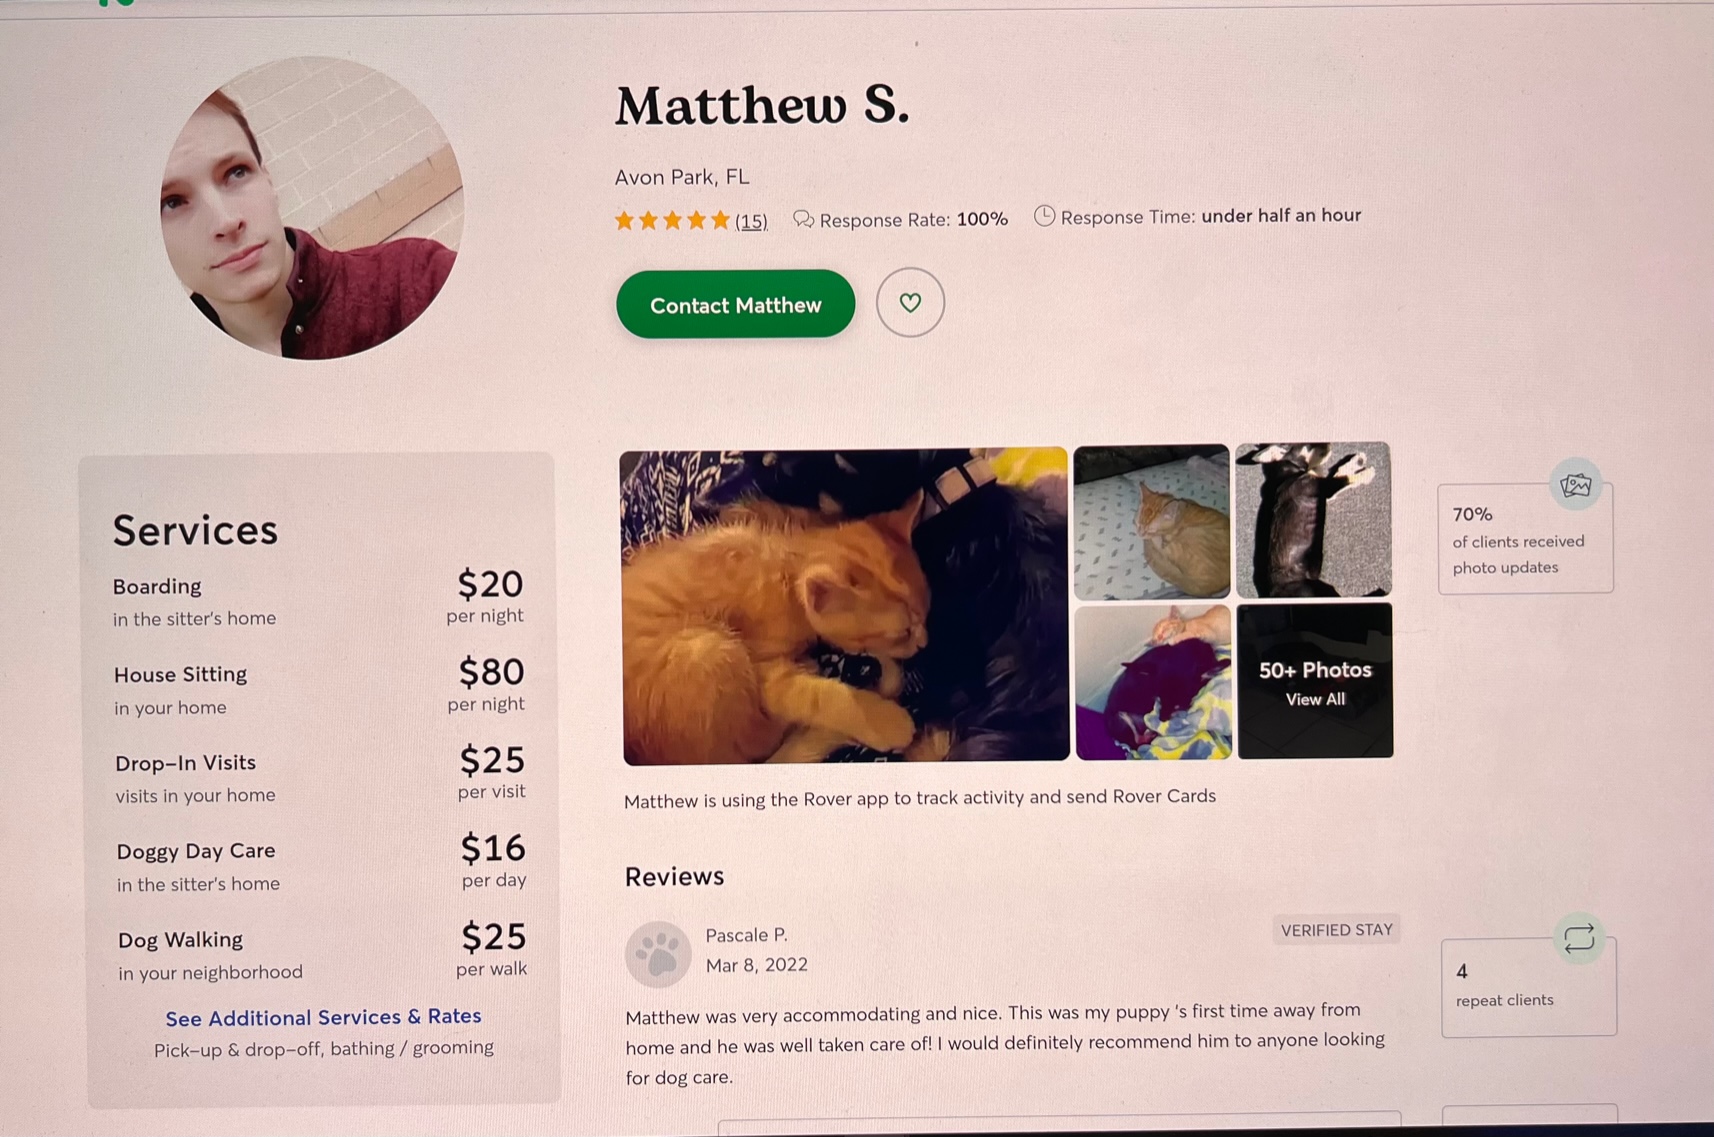 This is Matthew Short's profile on Rover.